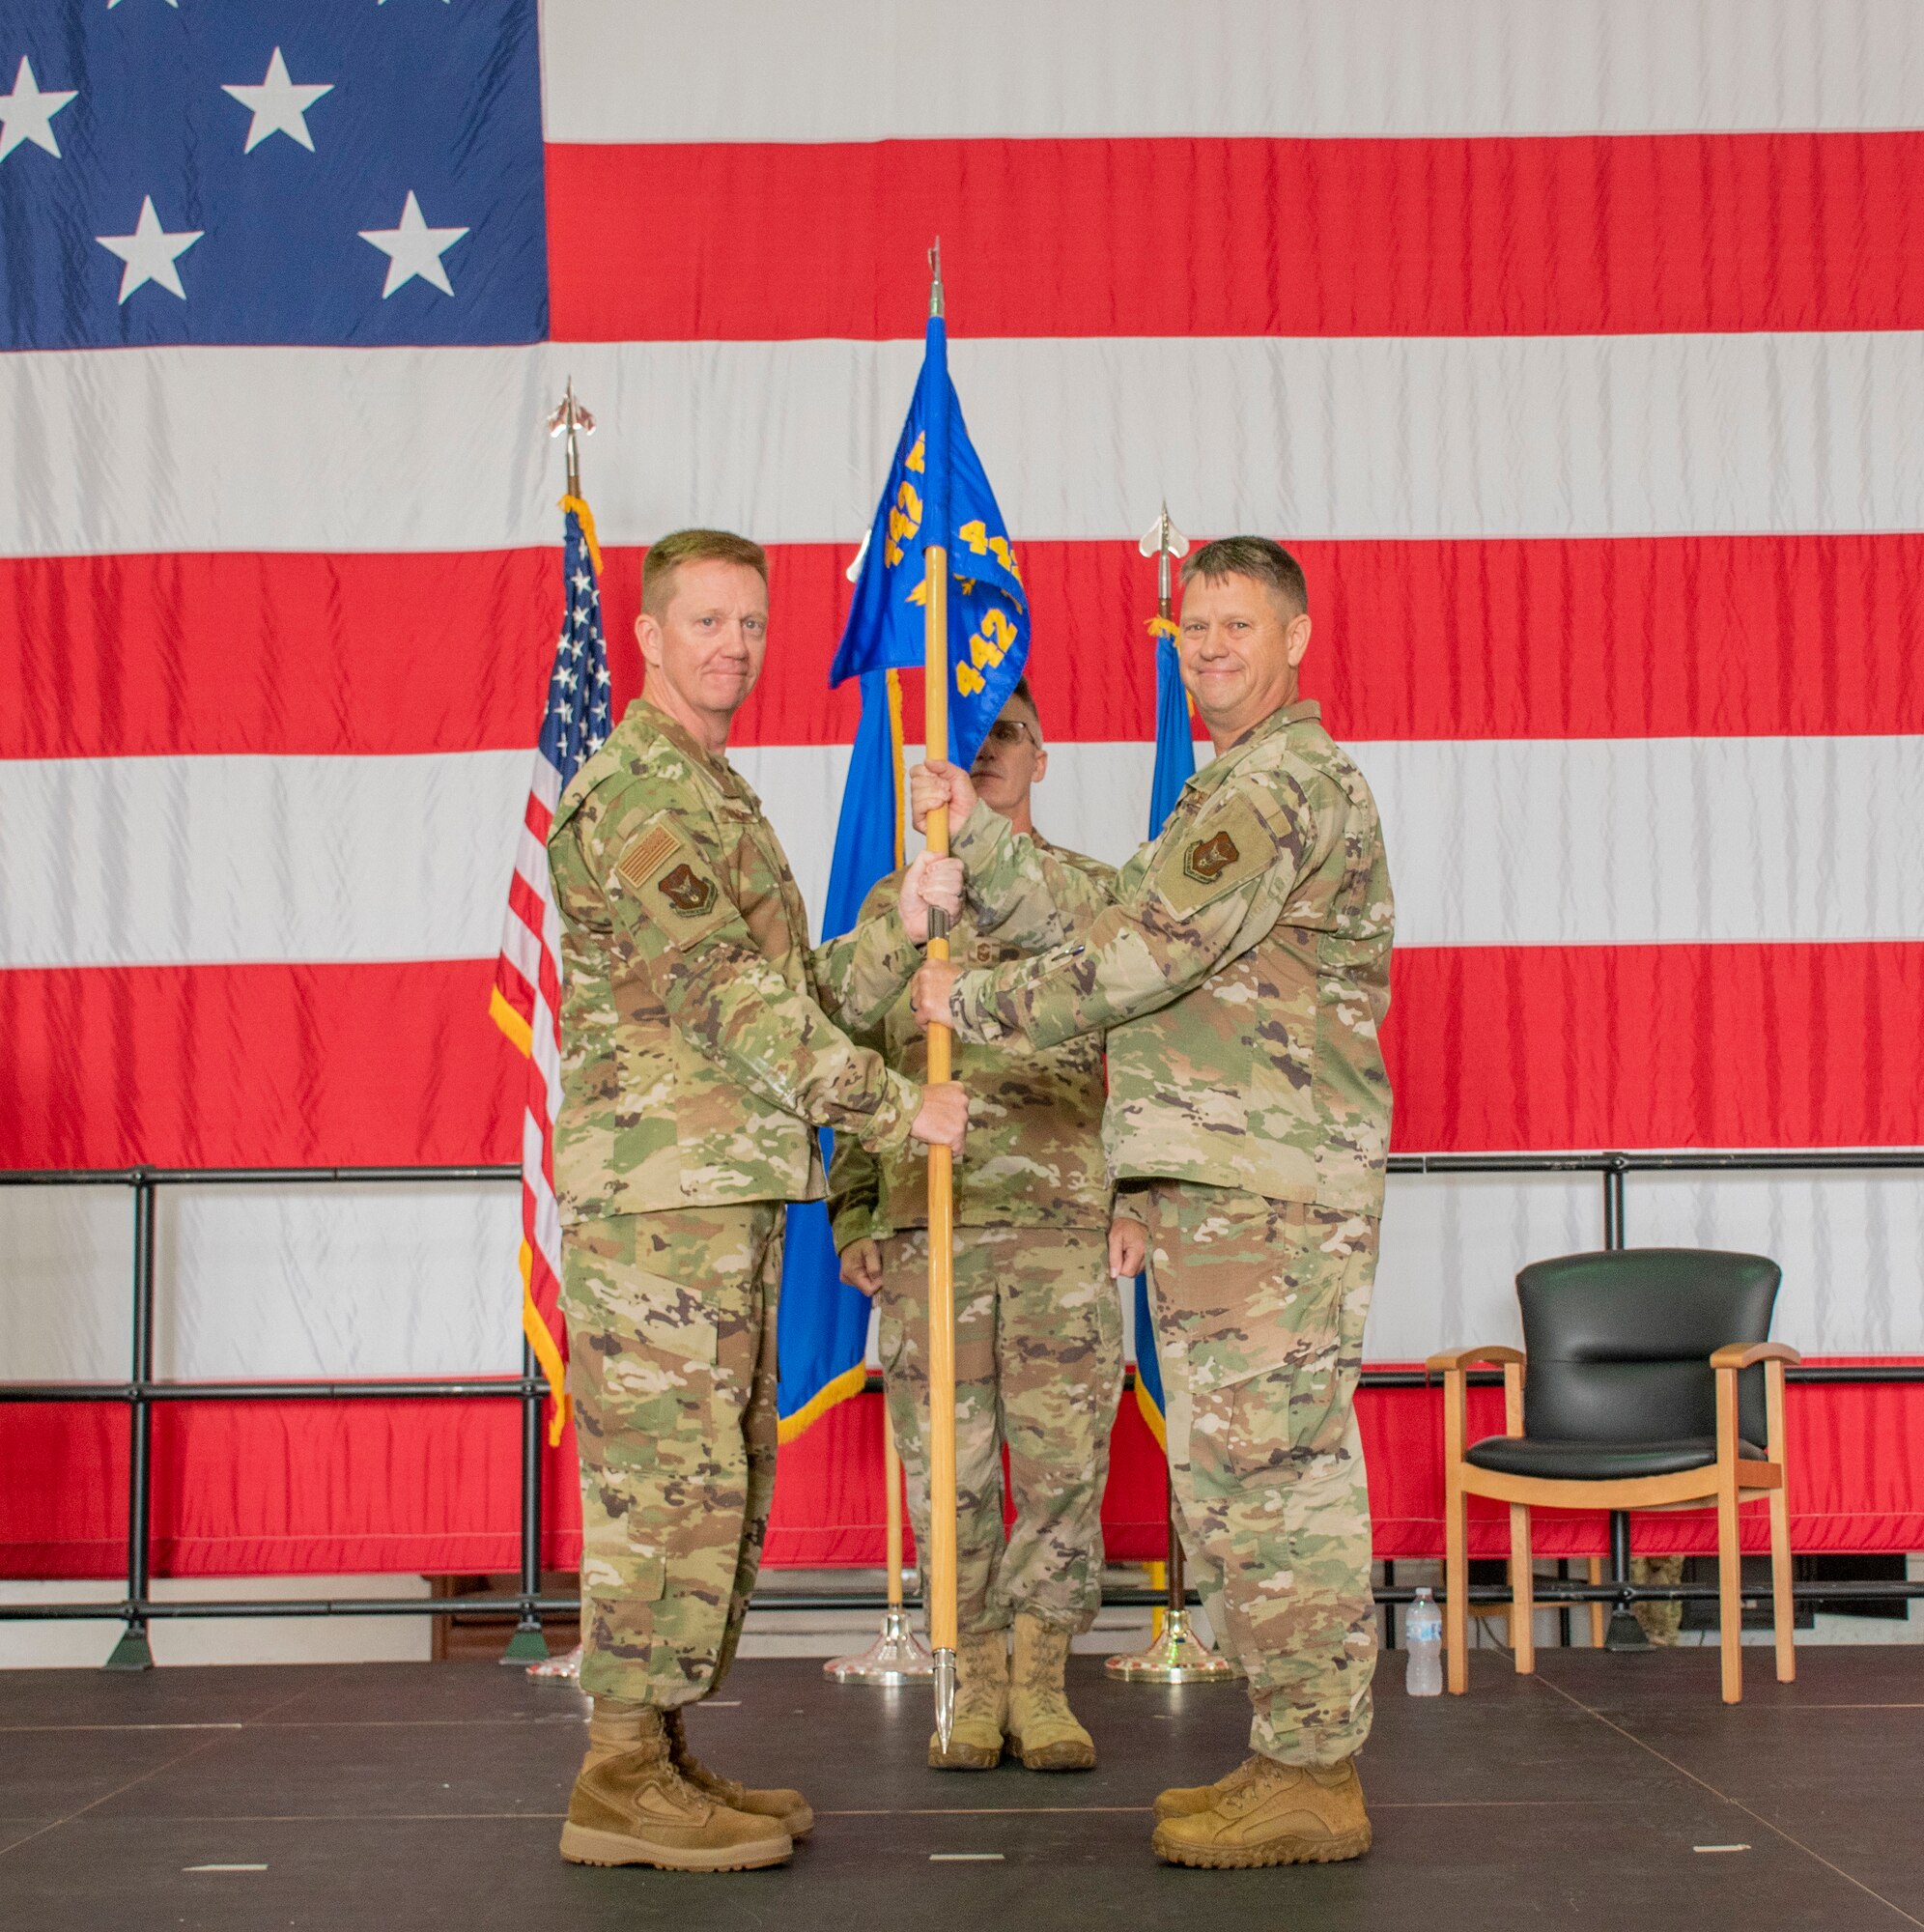 U.S. Air Force Brig. Gen. Michael Schultz, 442d Fighter Wing Commander, left, passes the unit flag to Lt. Col. William McLeod, in-coming 442d Maintenance Group Commander, for the 442d Maintenance Group assumption of command ceremony on Aug. 7, 2021 at Whiteman Air Force Base, Mo. (U.S. Air Force photo by Maj. Shelley Ecklebe)